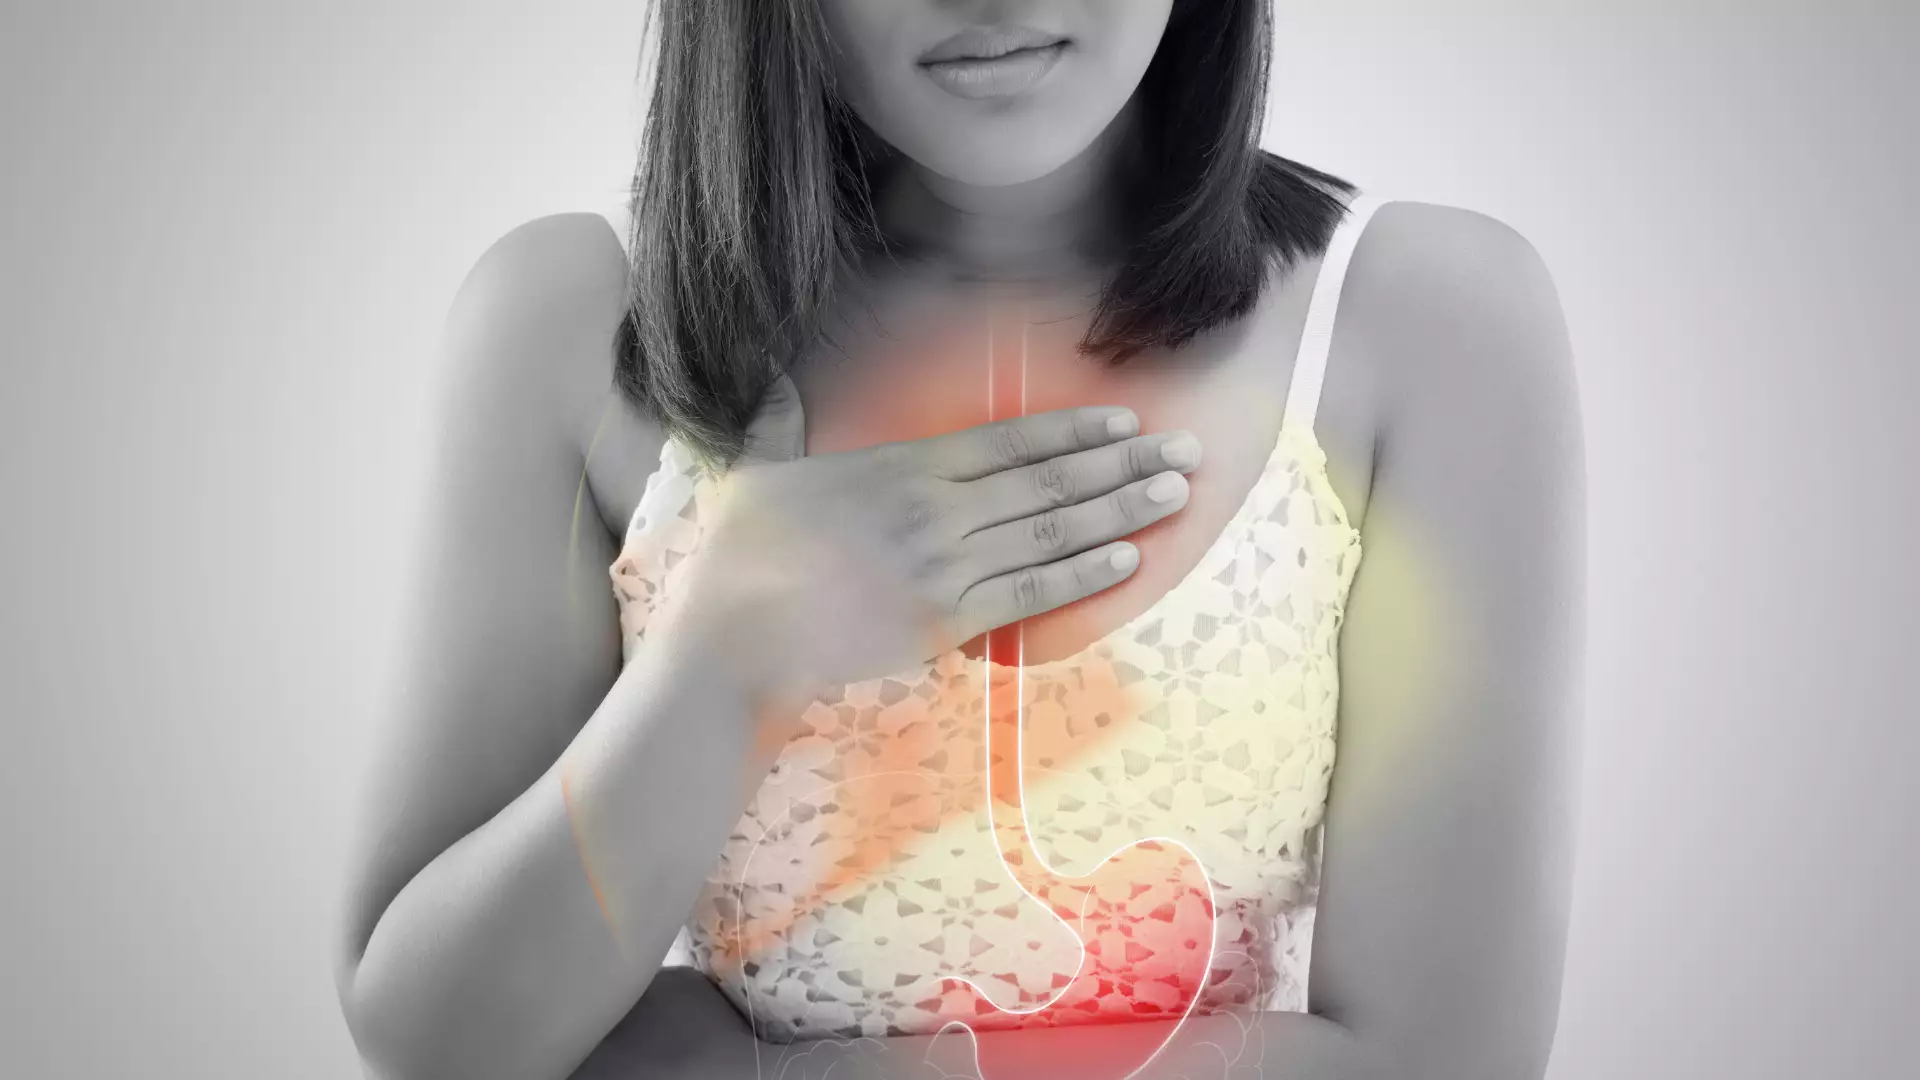 What is gastritis? What Are the Symptoms of Gastritis? What are the Causes of Gastritis?